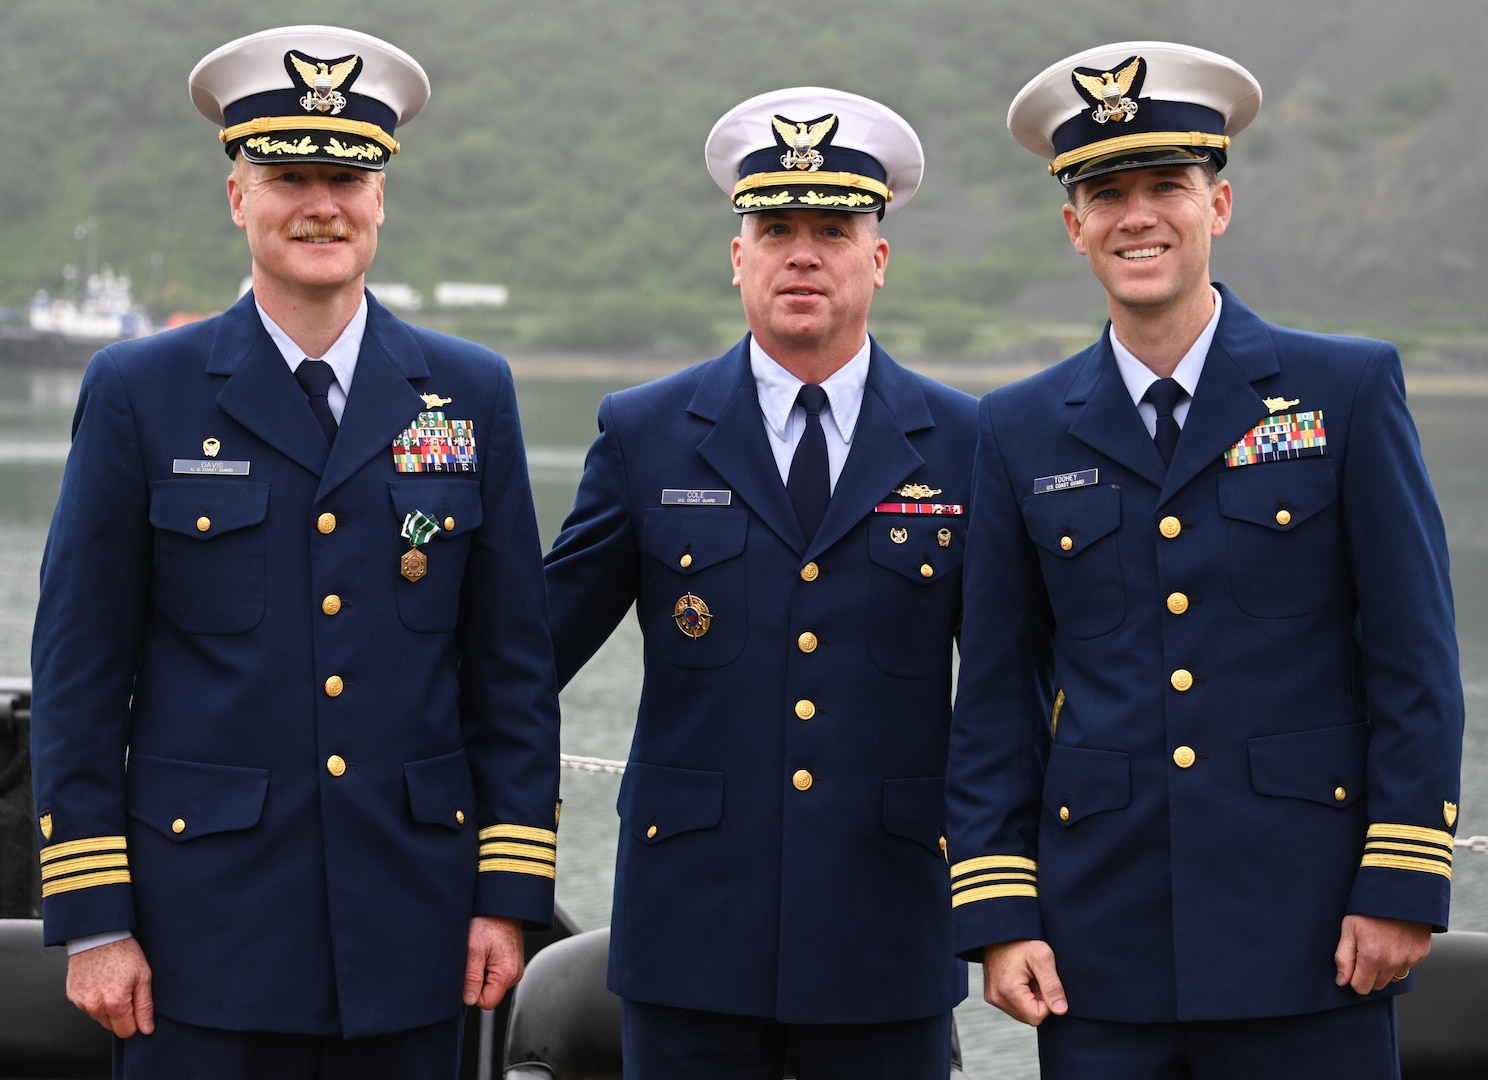 From left, U.S. Coast Guard Cdr. Daniel Davis, Capt. John Cole, Chief of Staff, Coast Guard 17th District, and Lt. Cmdr. James Toohey, commanding officer, Cypress, pose for a photo during a change-of-command ceremony at Base Kodiak, Aug. 3, 2023. The change-of-command ceremony is a historic Coast Guard and Naval tradition, which has remained unchanged for centuries and includes the reading of the command orders in the presence of all unit crewmembers. U.S. Coast Guard photo by Petty Officer 3rd Class Ian Gray.